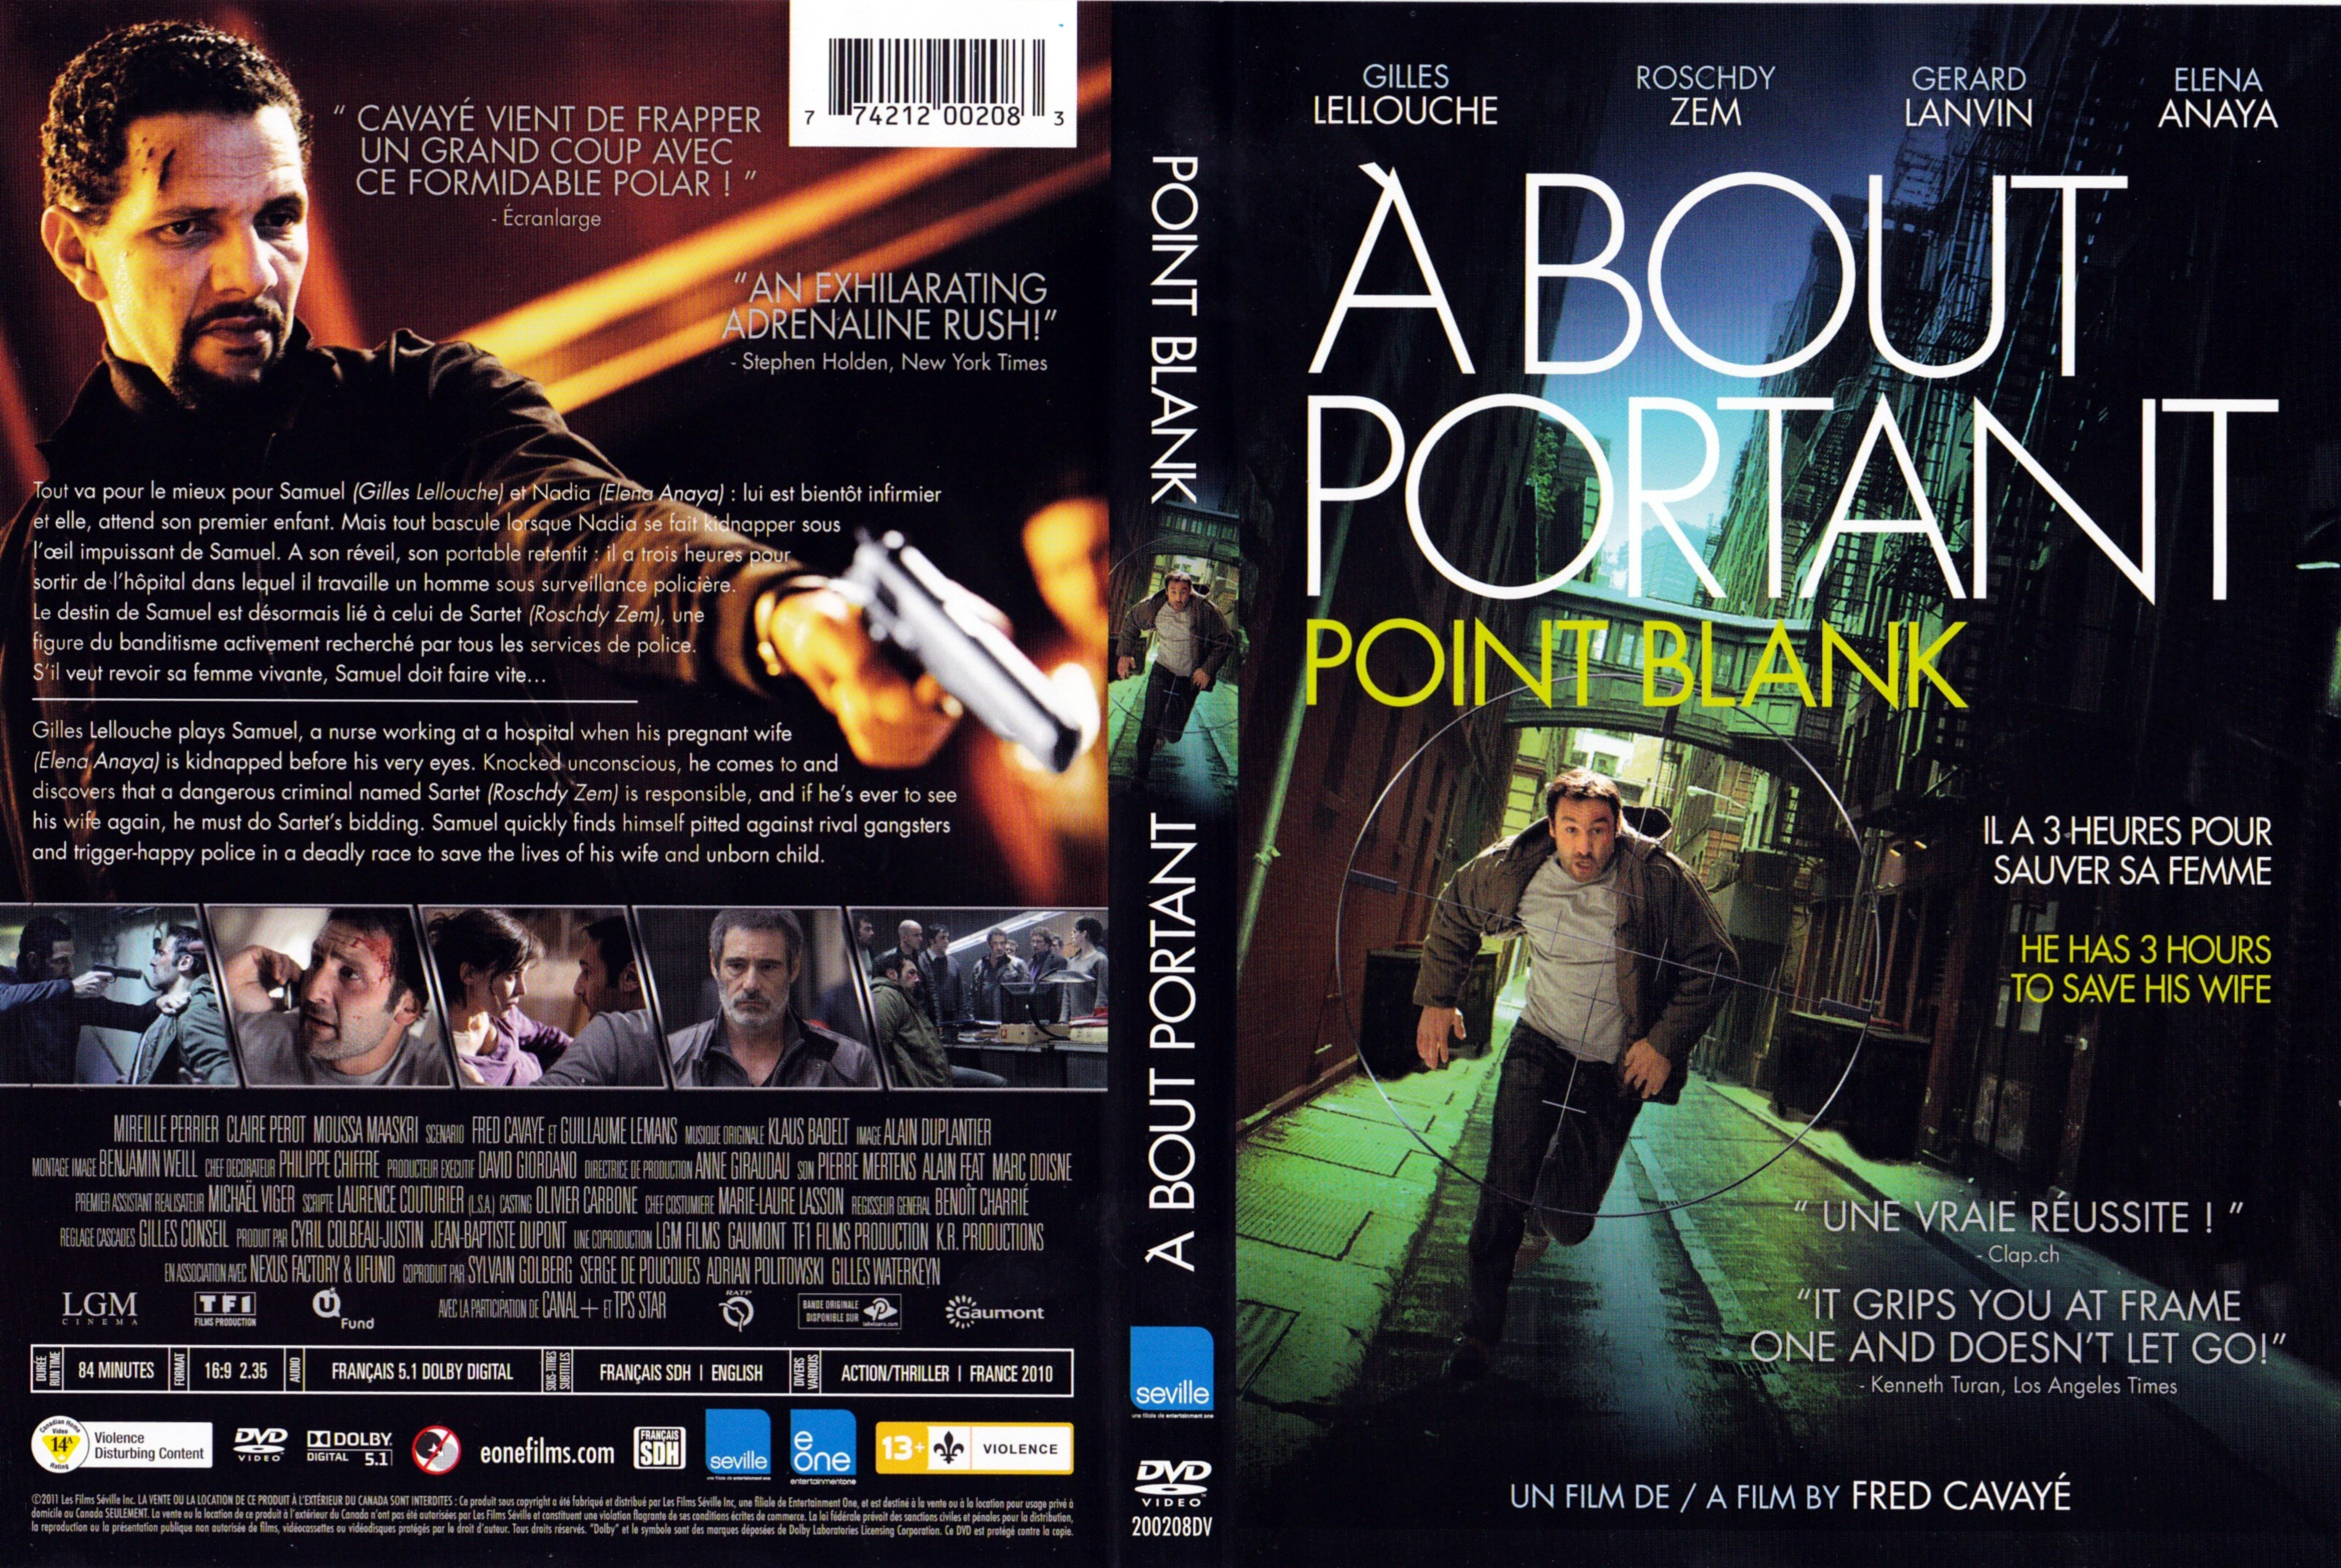 Jaquette DVD A bout portant - Point blank (Canadienne)